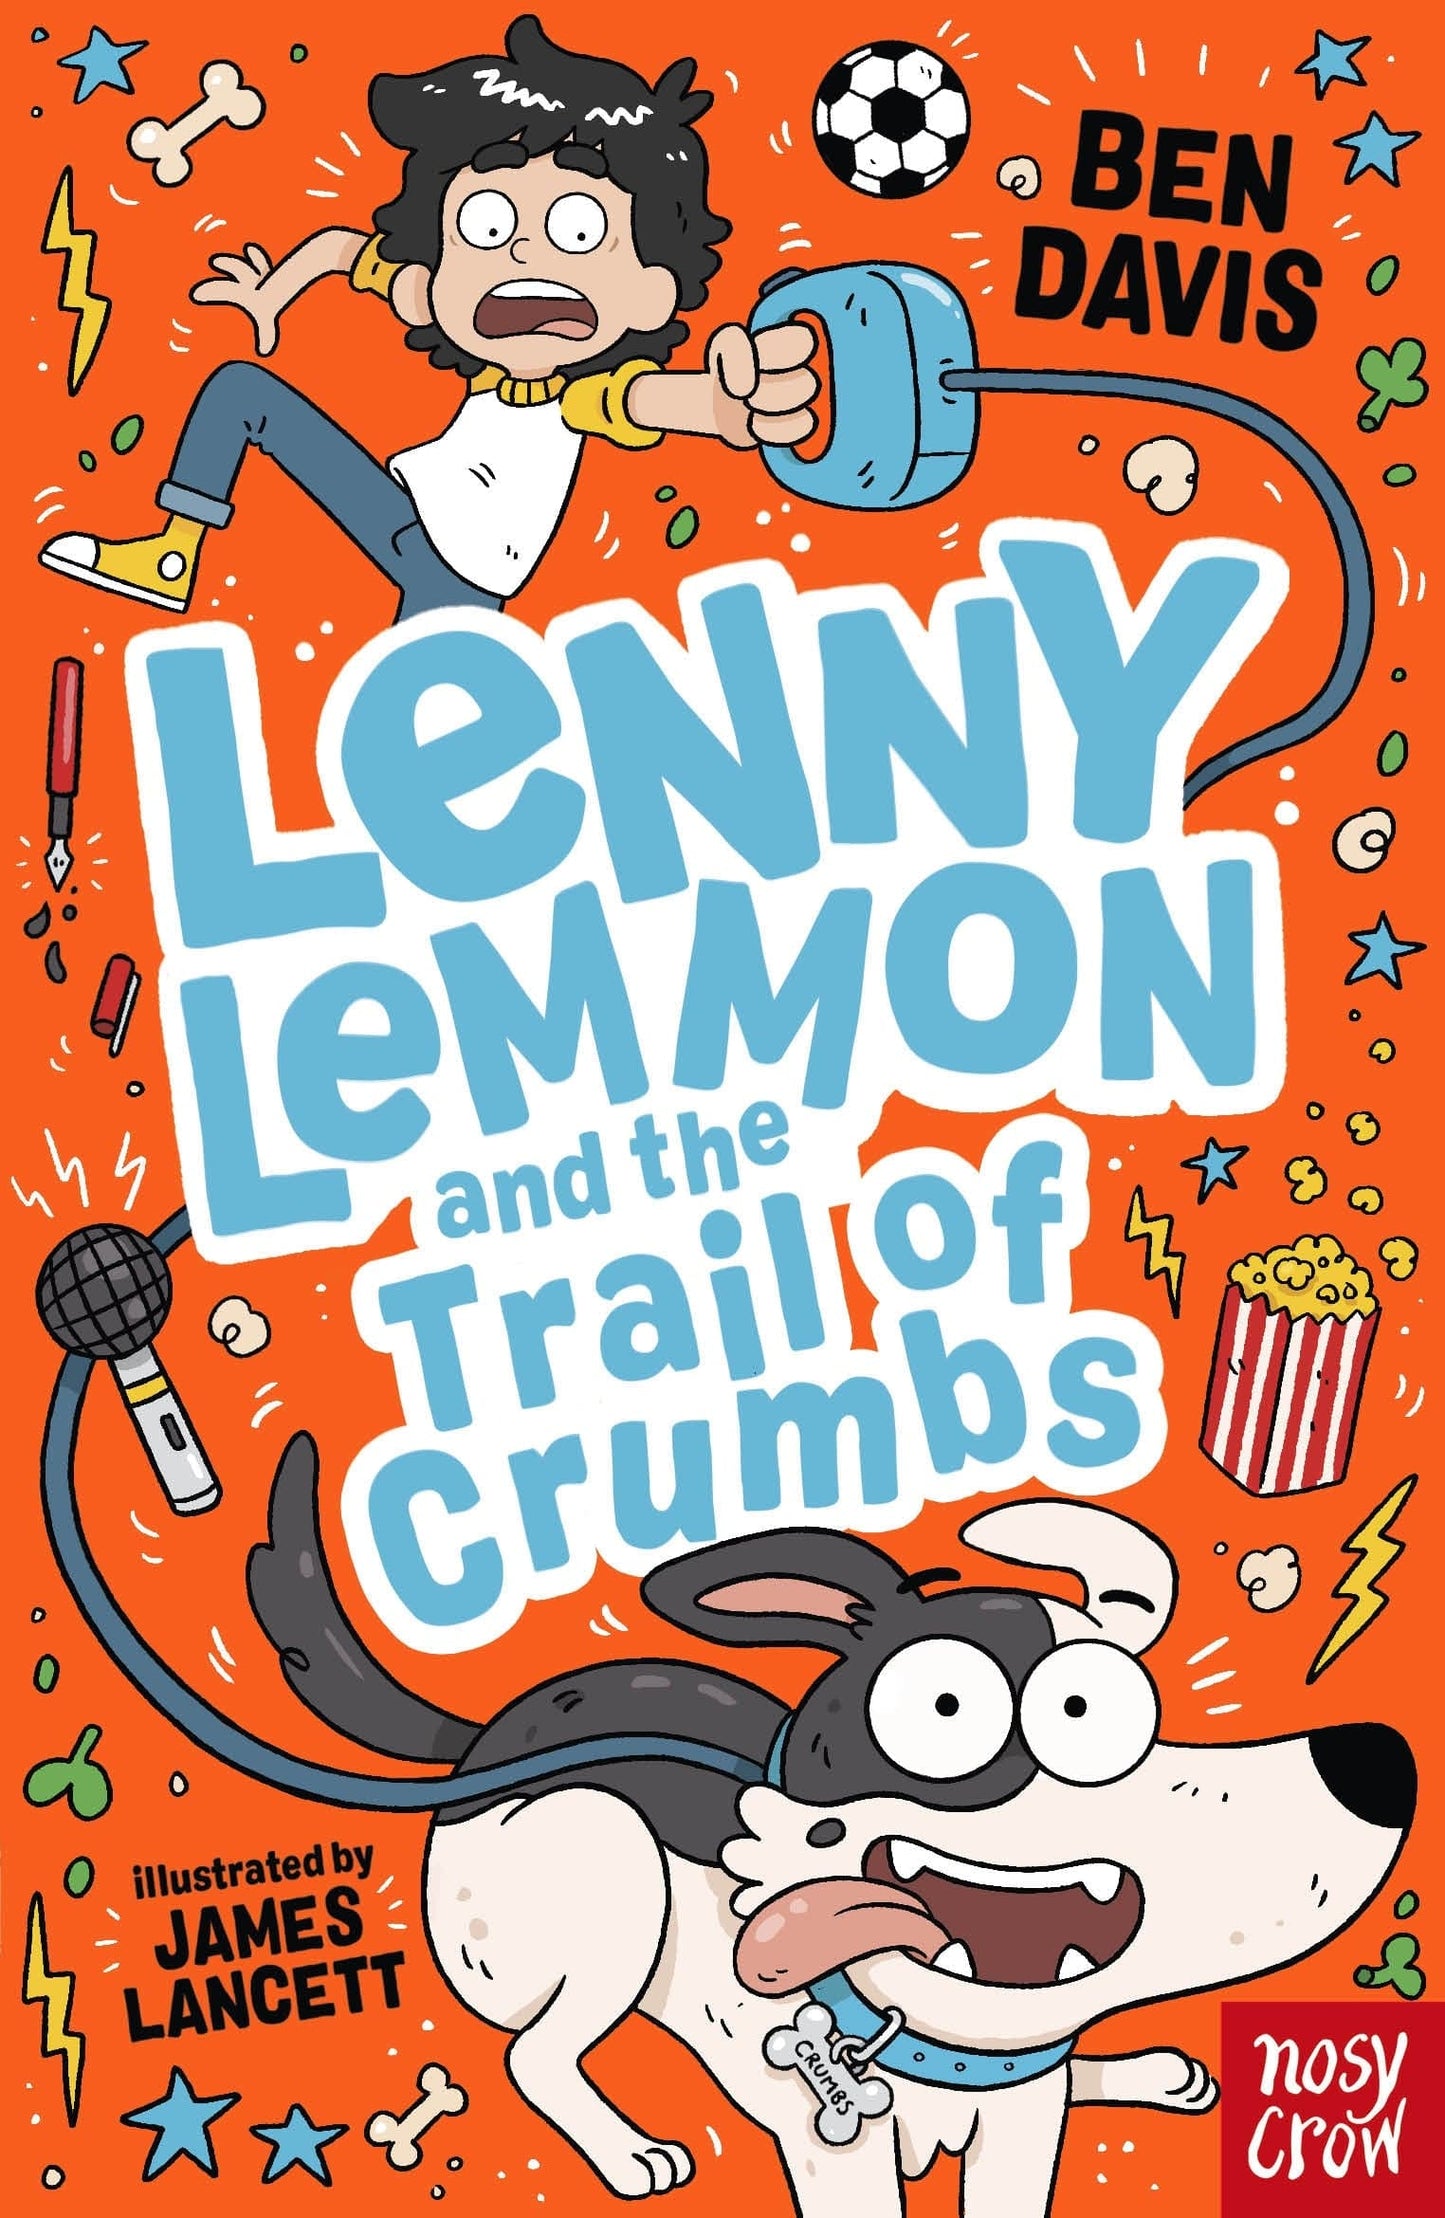 Nosy Crow Lenny Lemmon and the Trail of Crumbs By Ben Davis & James Lancett